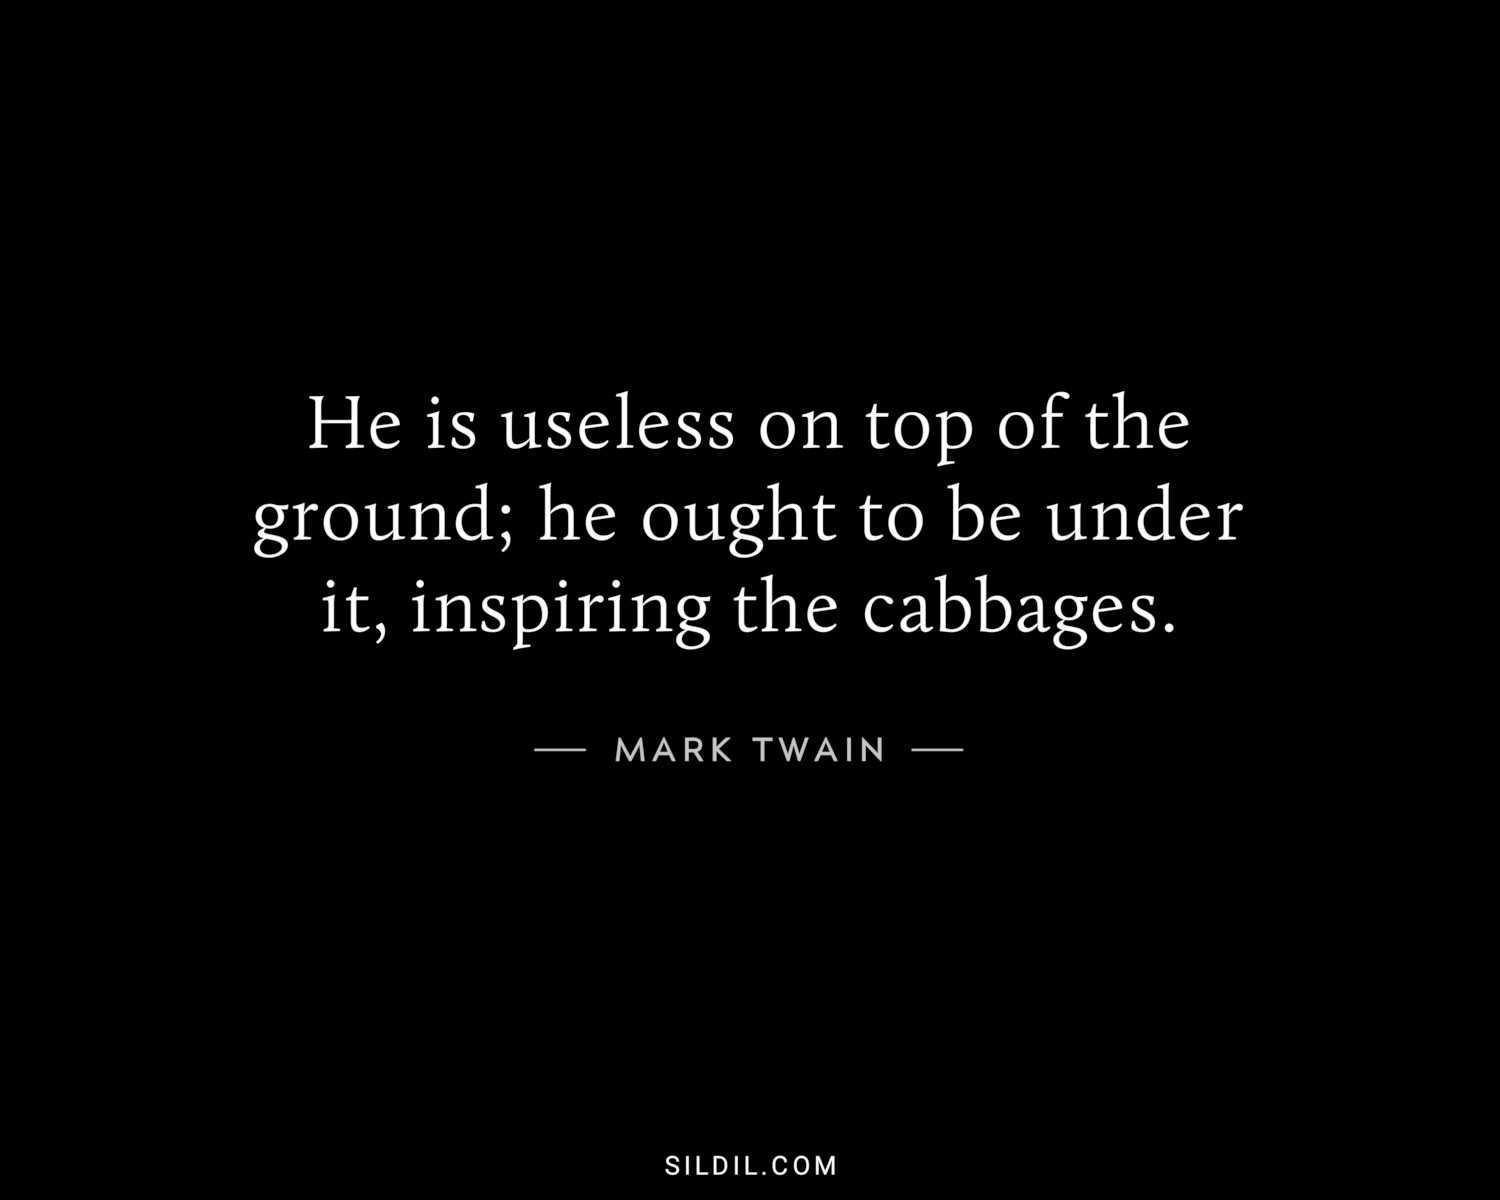 He is useless on top of the ground; he ought to be under it, inspiring the cabbages.